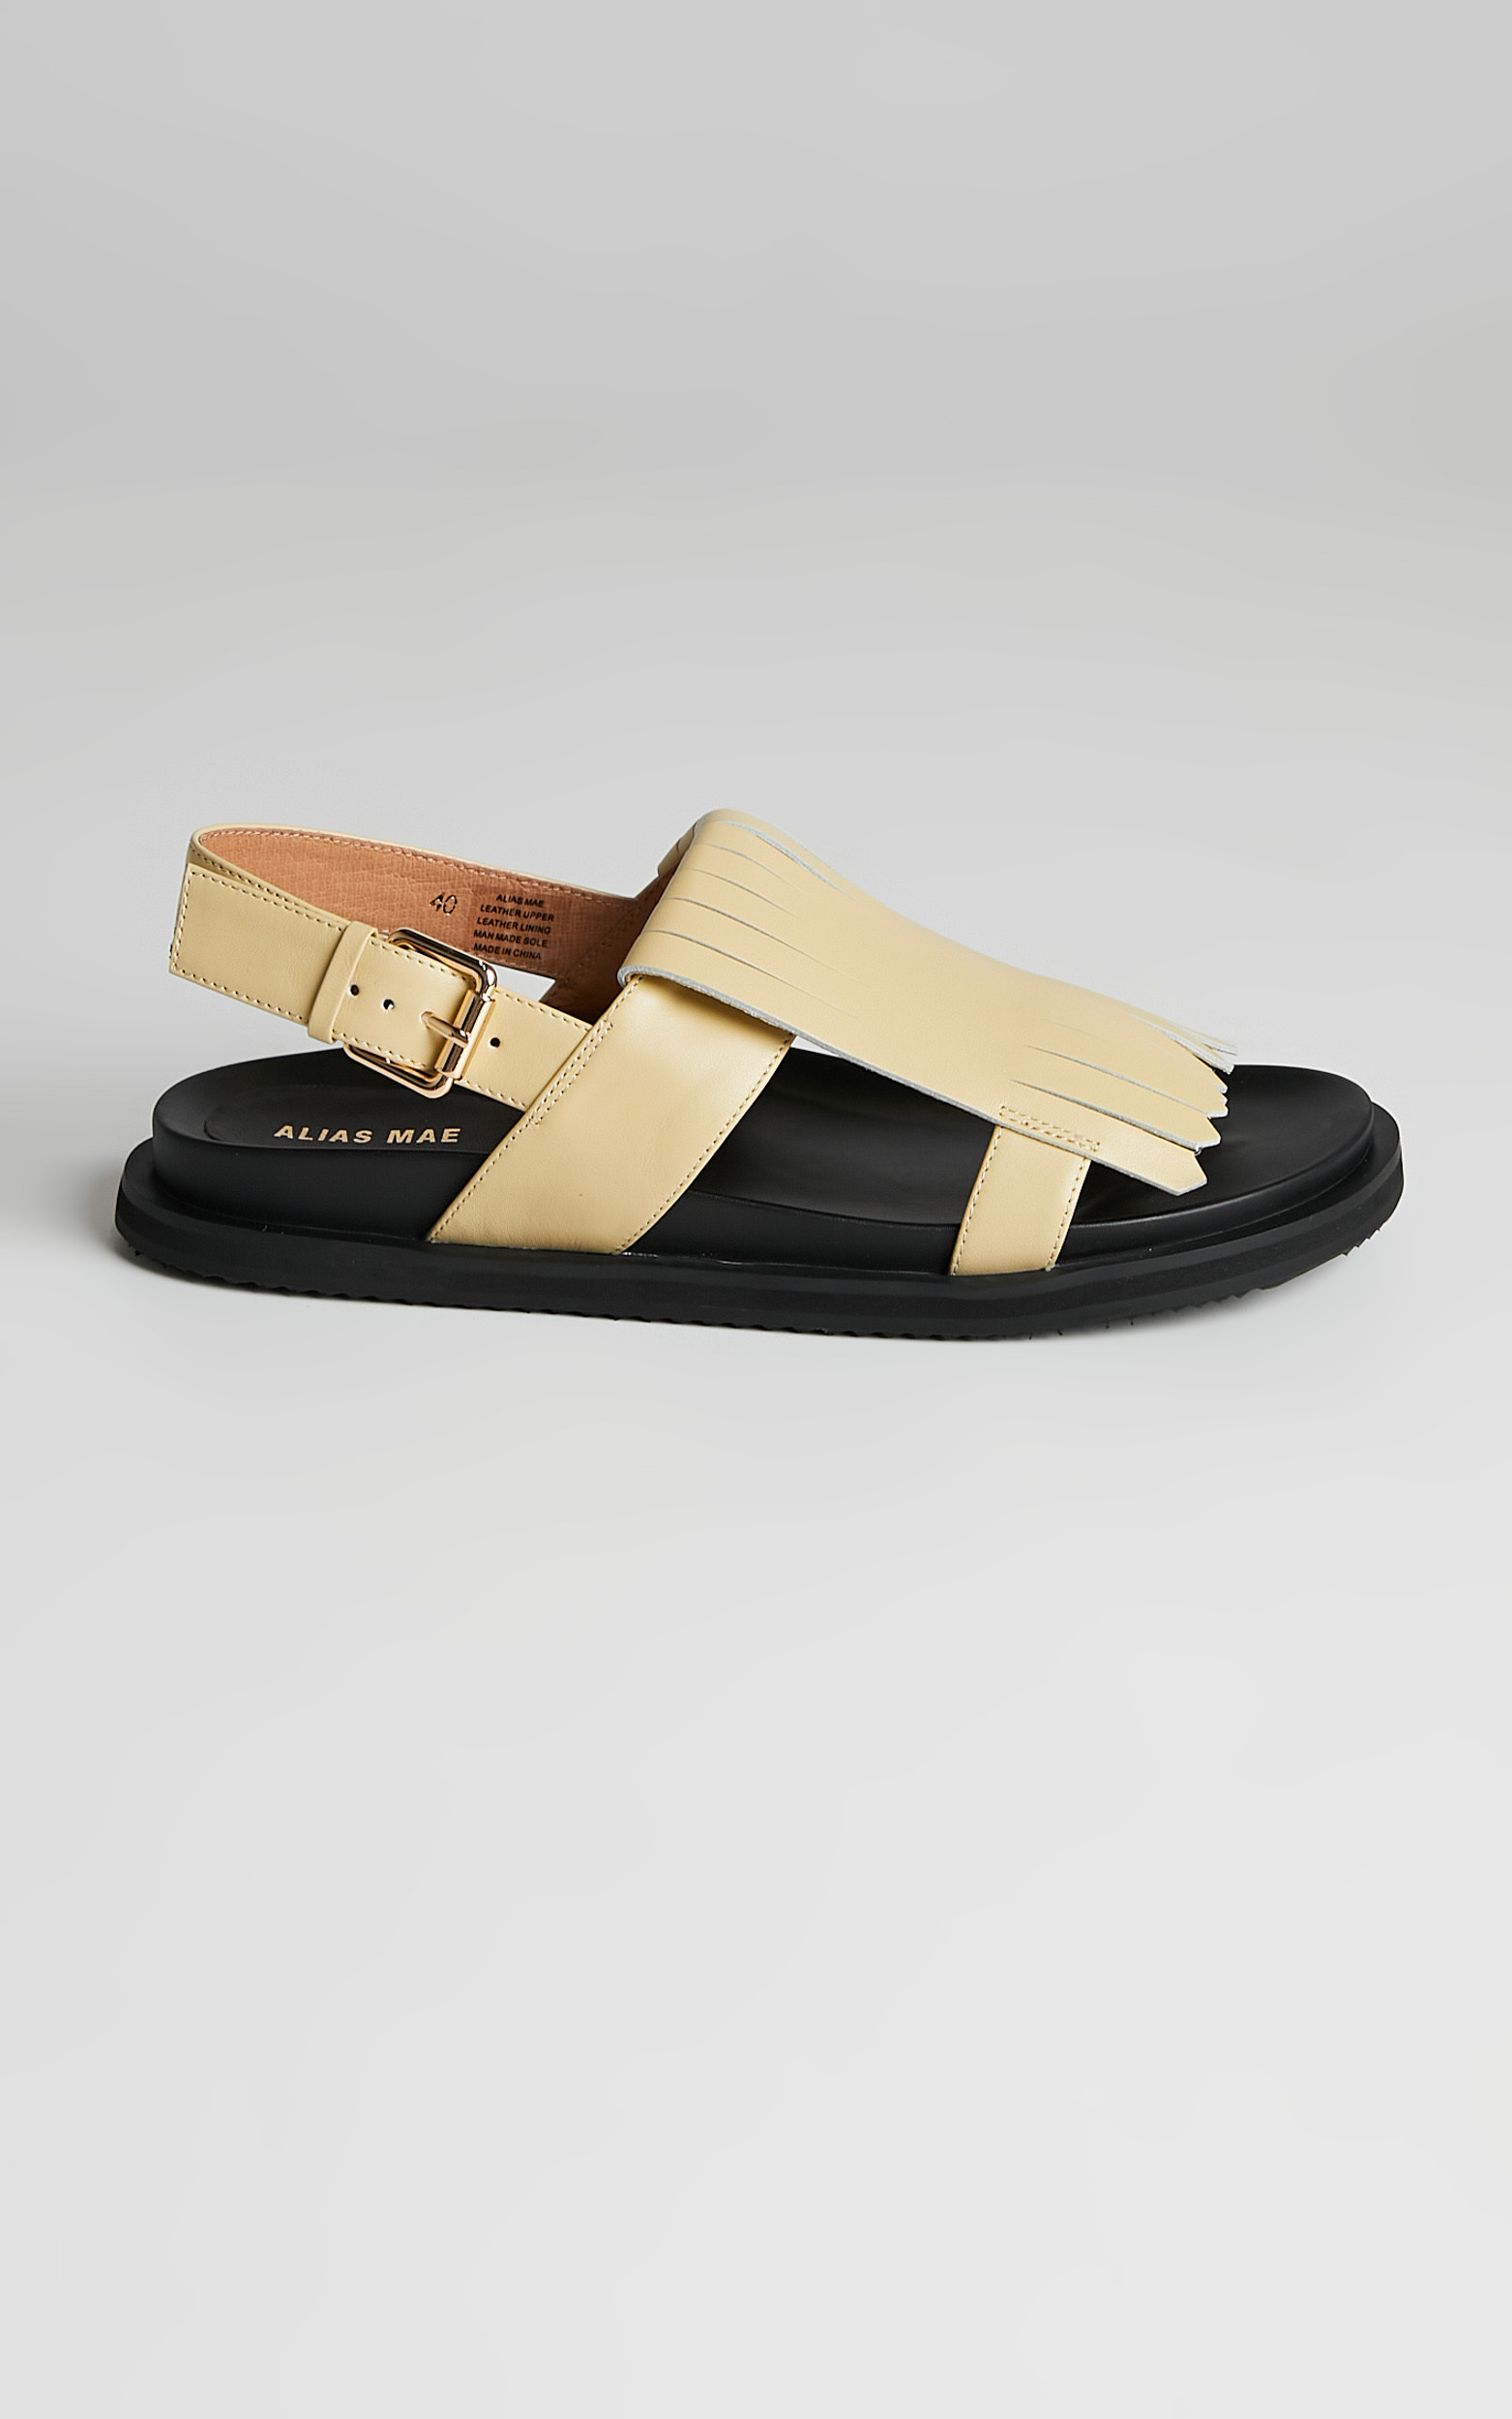 Alias Mae - Payton Sandals in Butter Leather - 10.5, CRE2, hi-res image number null